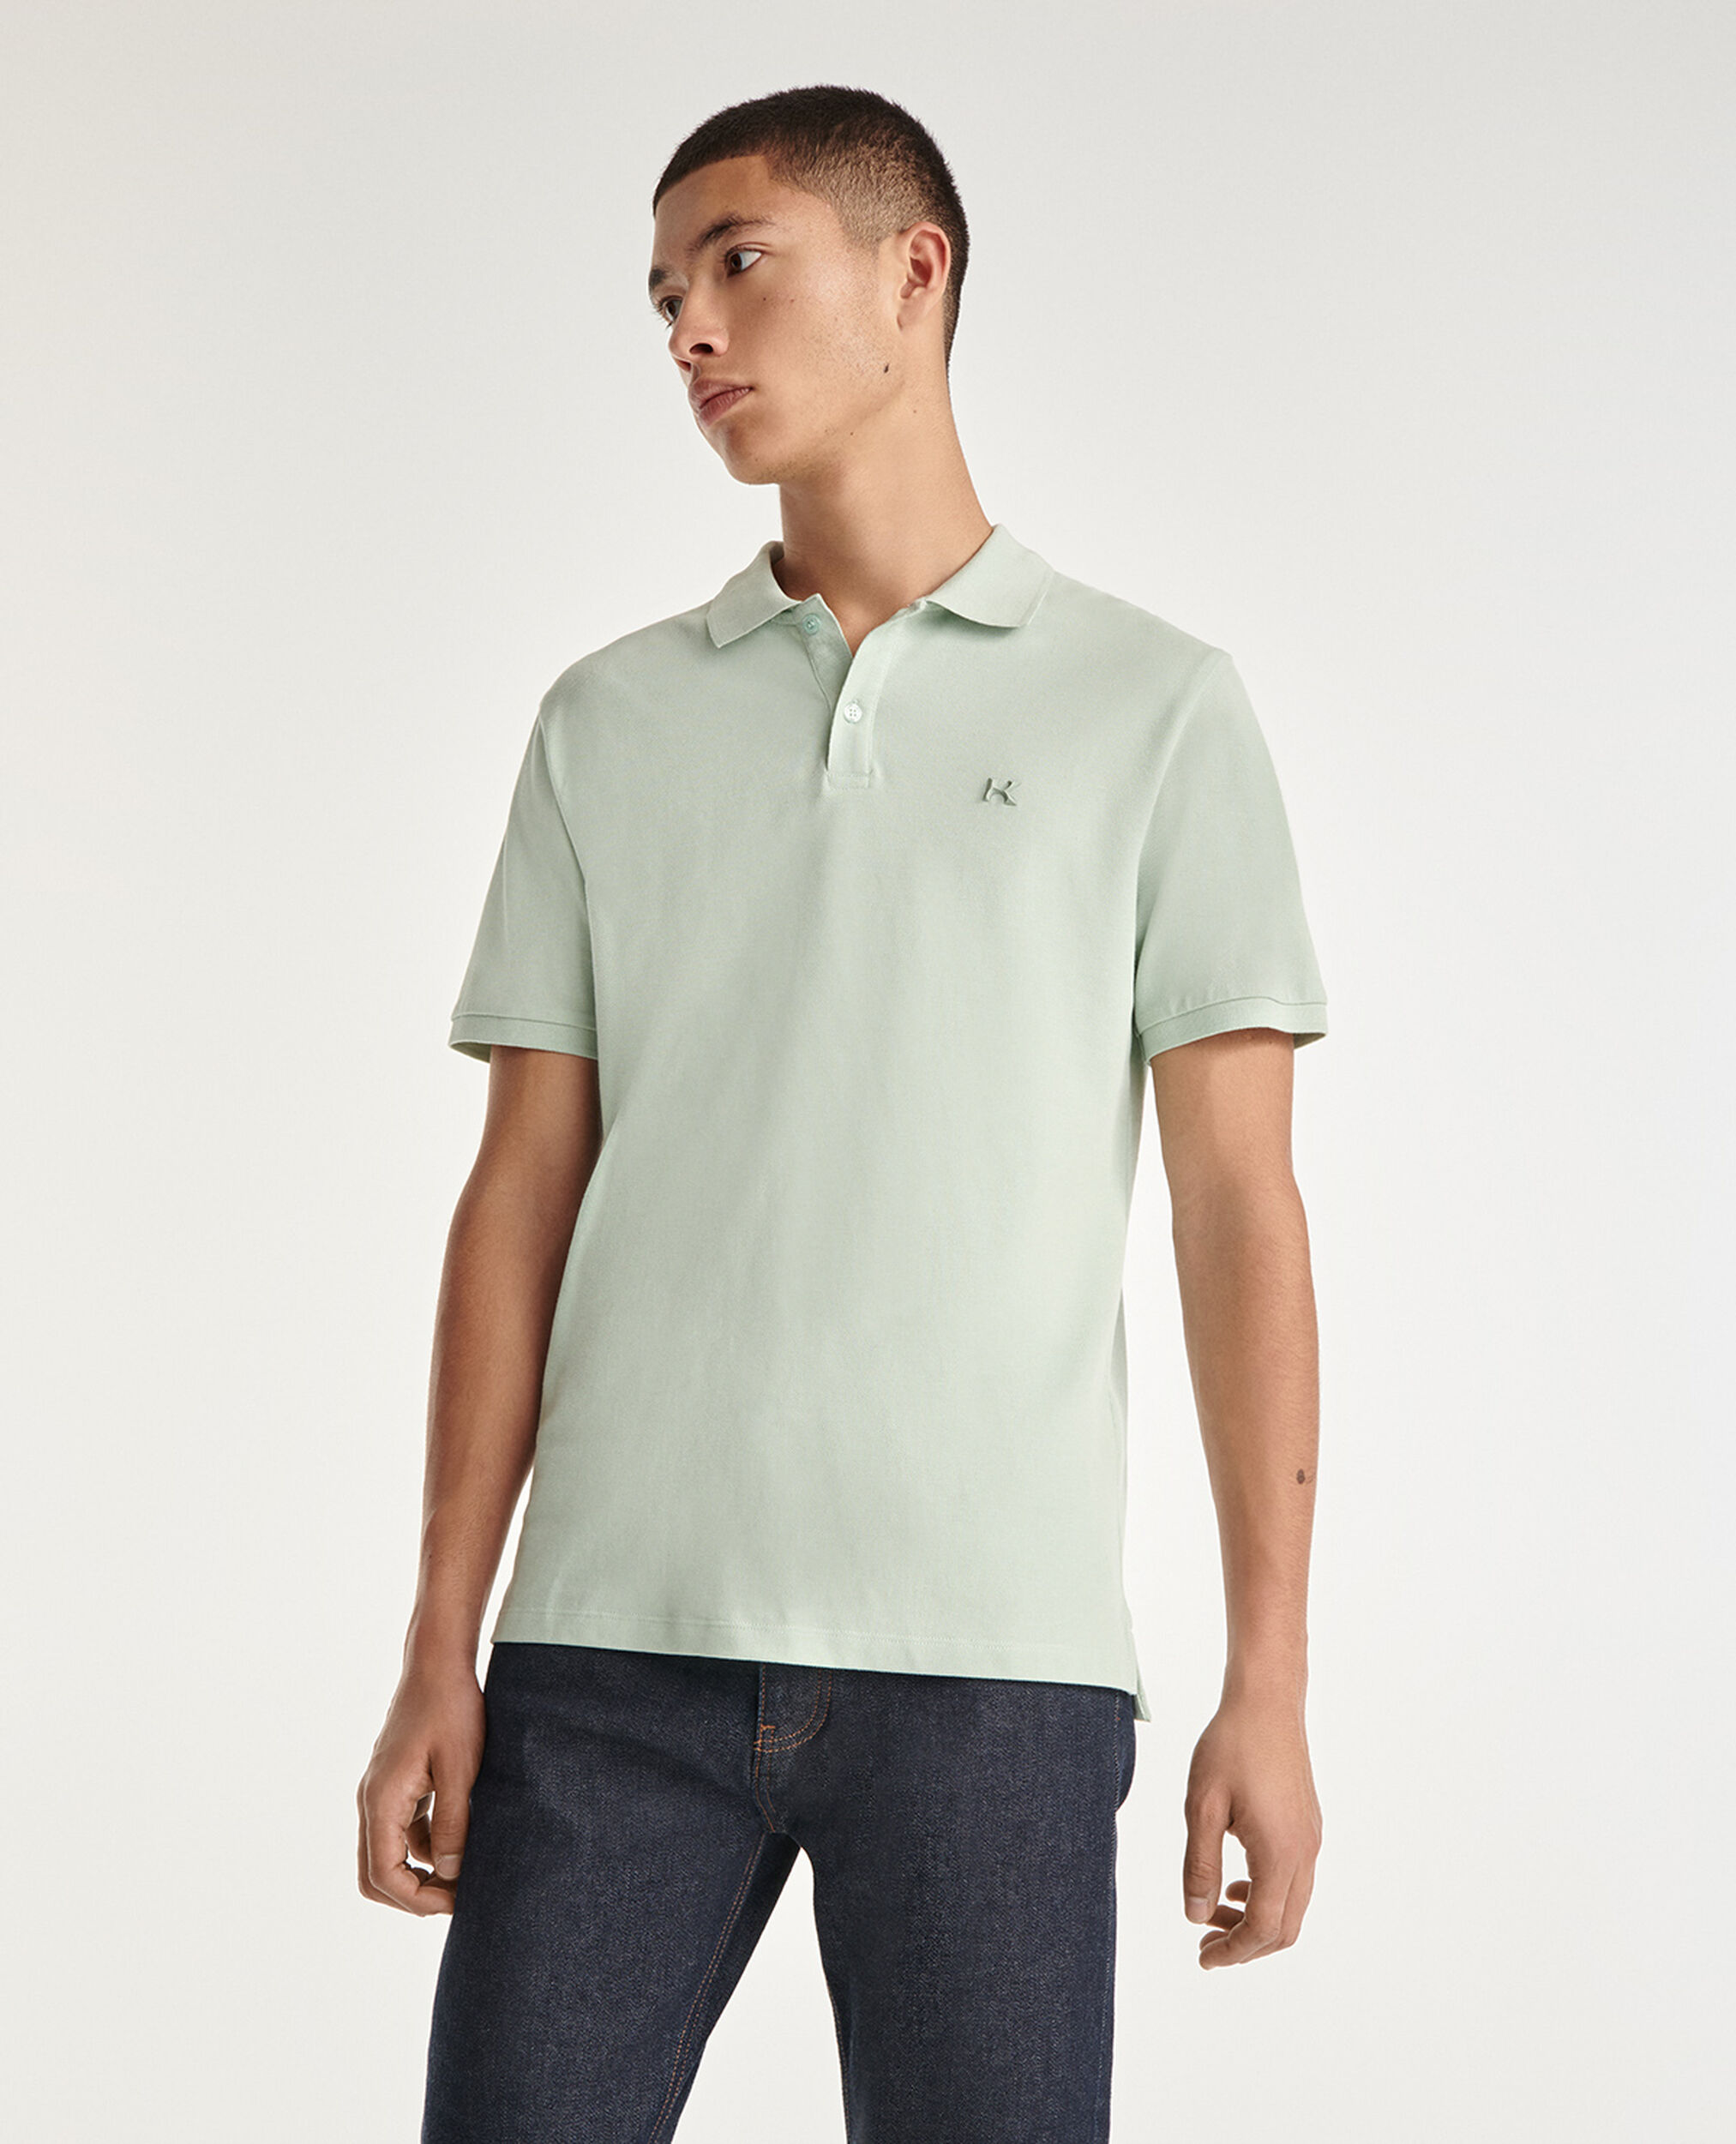 Camisa polo verde menta logotipo goma, FROSTY GREEN, hi-res image number null